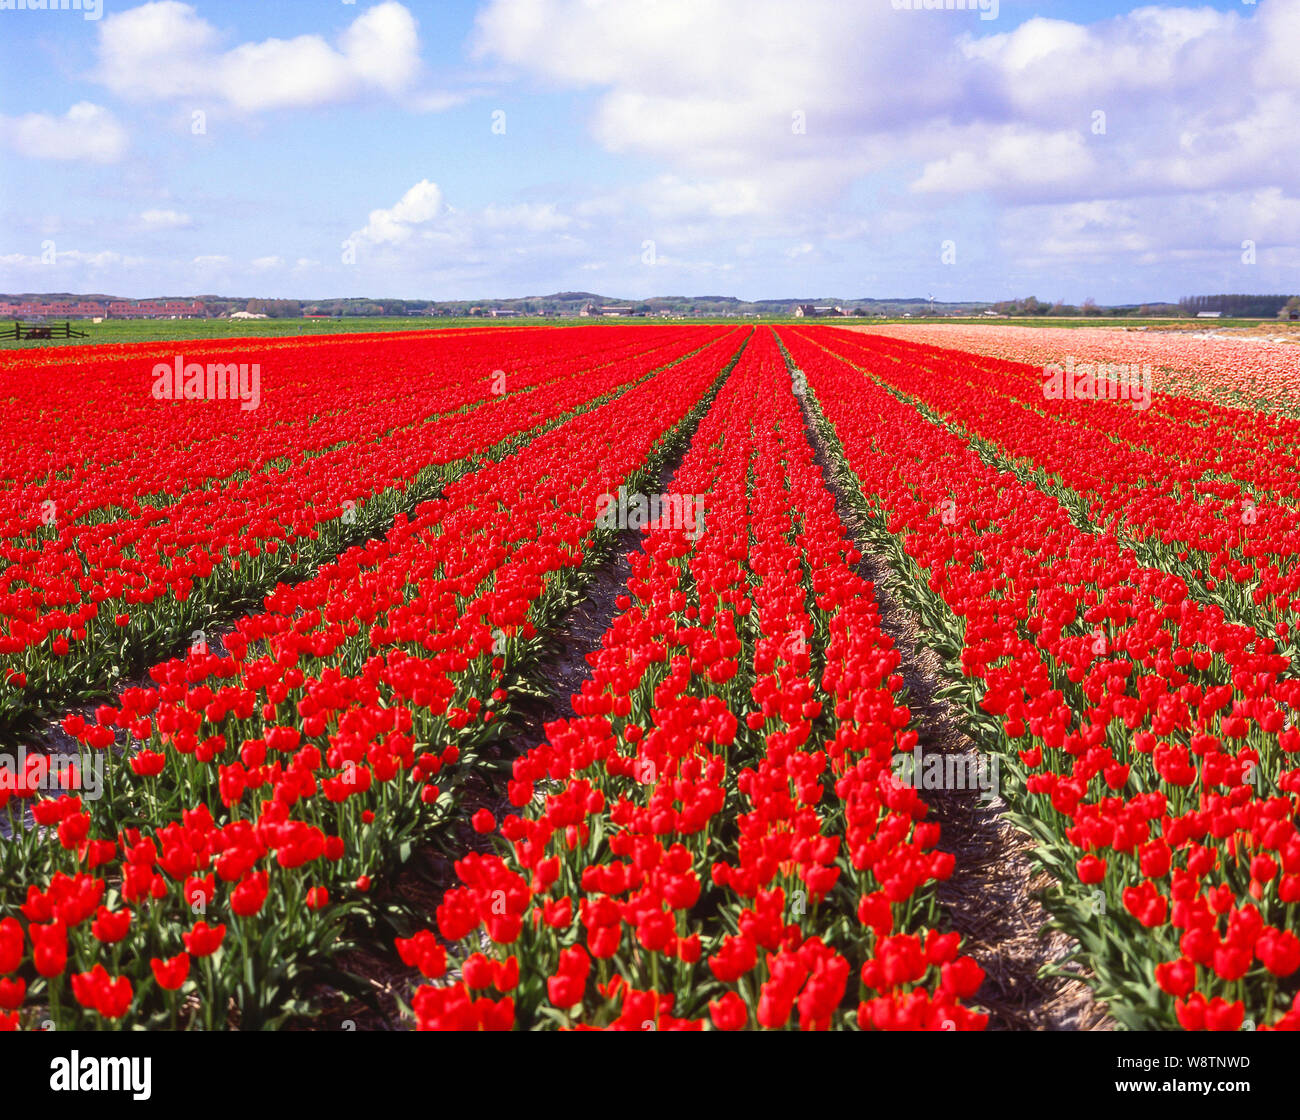 Field of tulips near Lisse, Zuid-Holland, Kingdom of the Netherlands Stock Photo